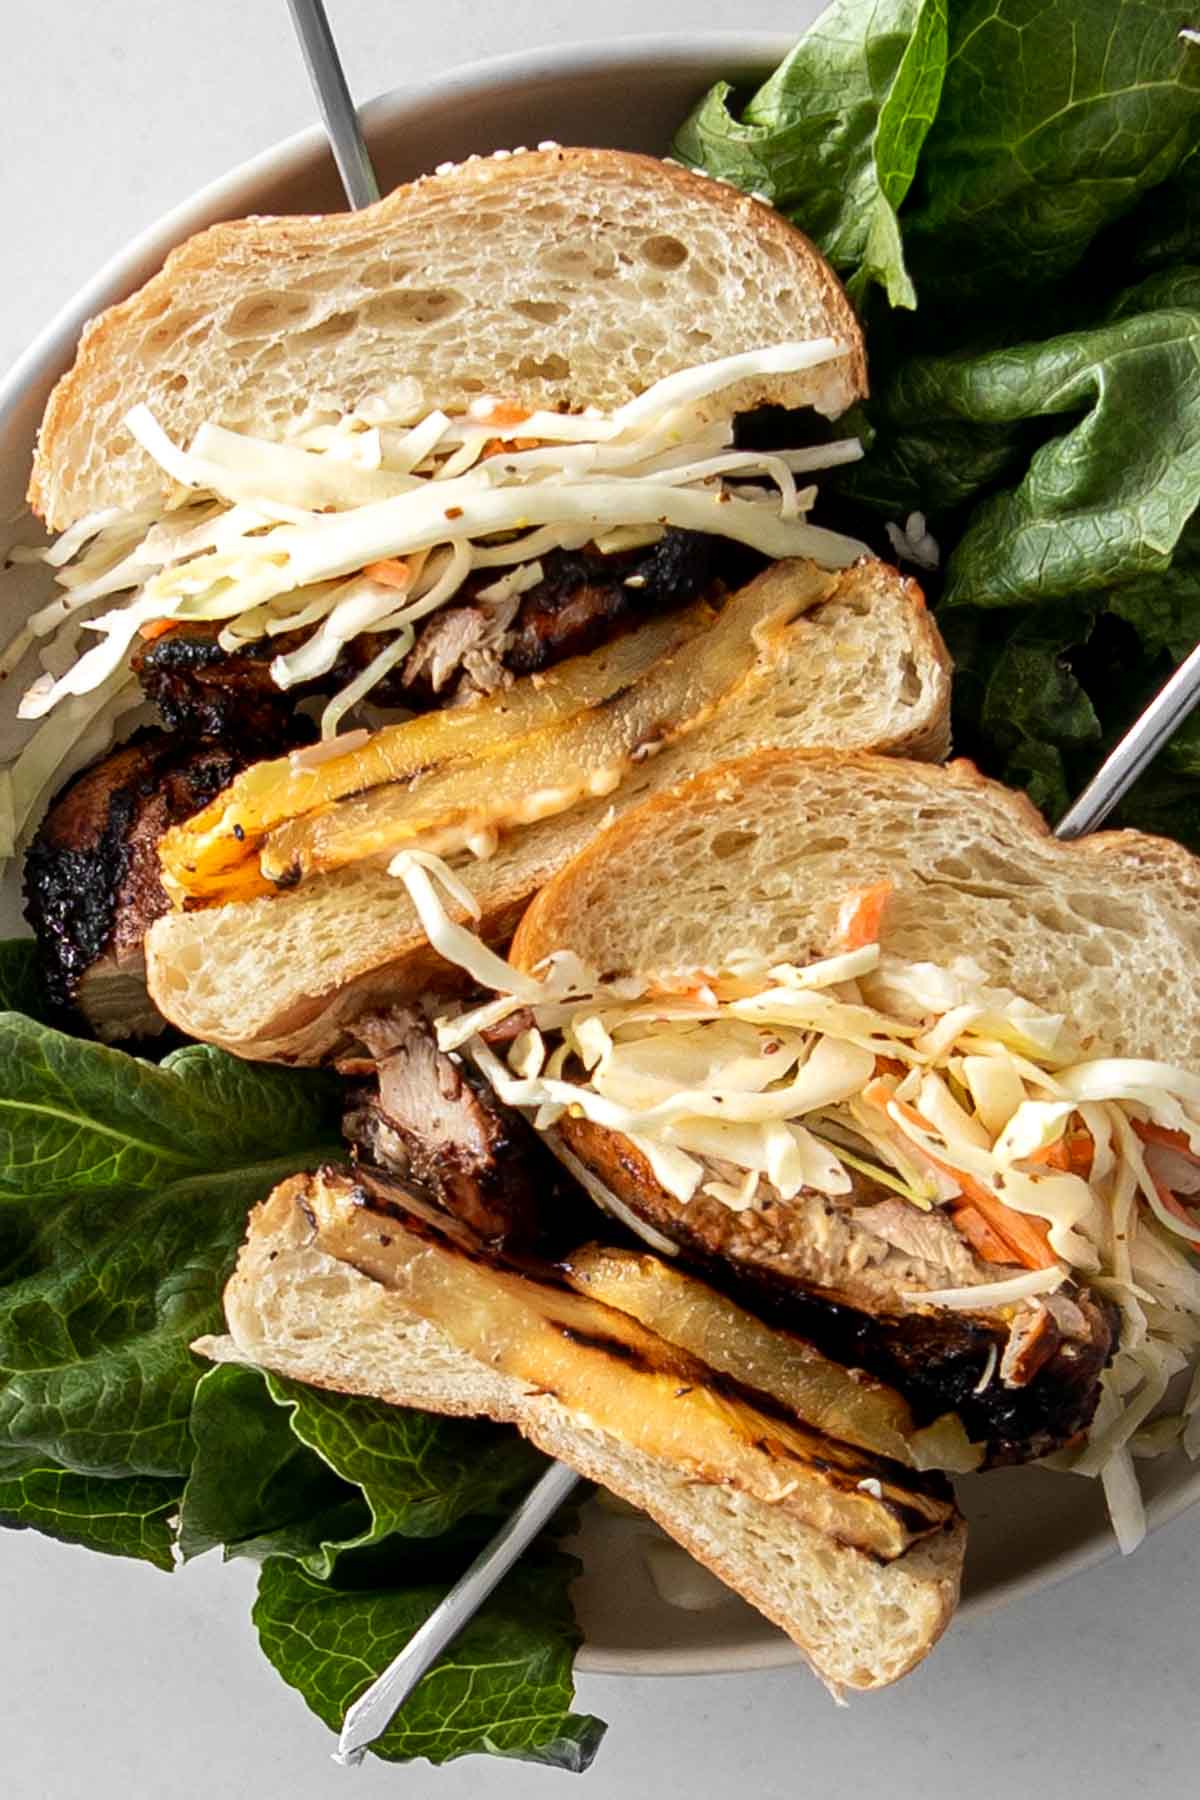 Grilled Jerk Chicken Sandwich halves pierced with skewers and laying on a bed of lettuce.